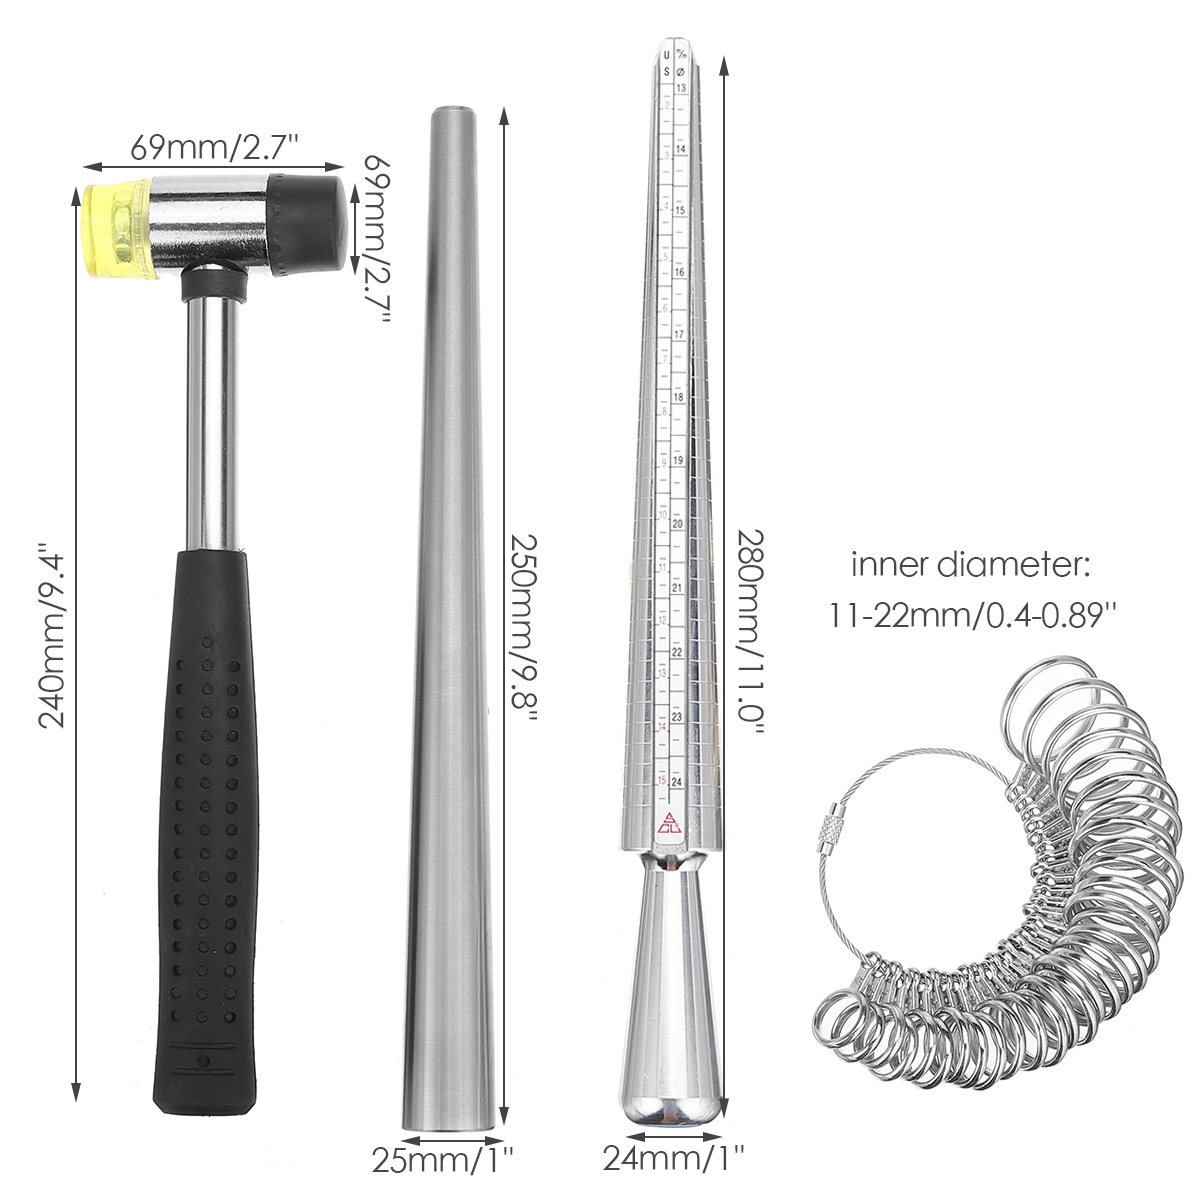 Jewelry-Measuring-Tool-Set-Alloy-Ring-Size-Stick-US-Code-Ring-Ruler-Hammer-Kit-1718557-16